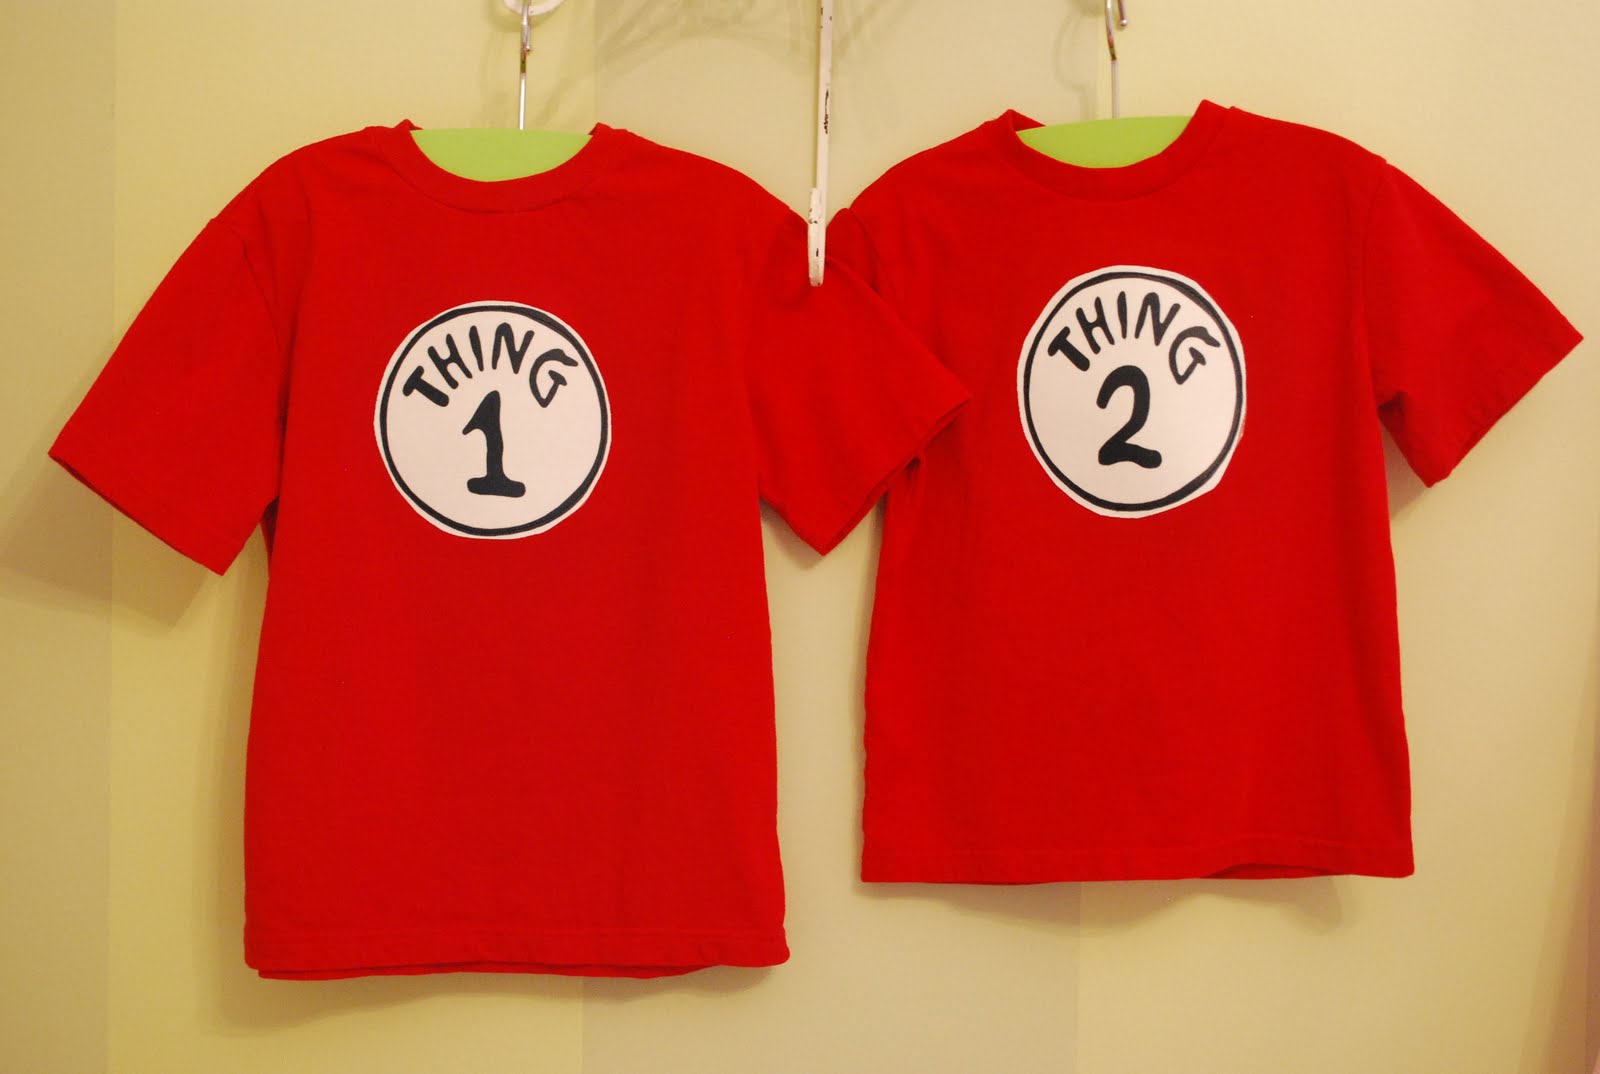 How-To: DIY Thing 1 and Thing 2 Kids T Shirts - YouTube